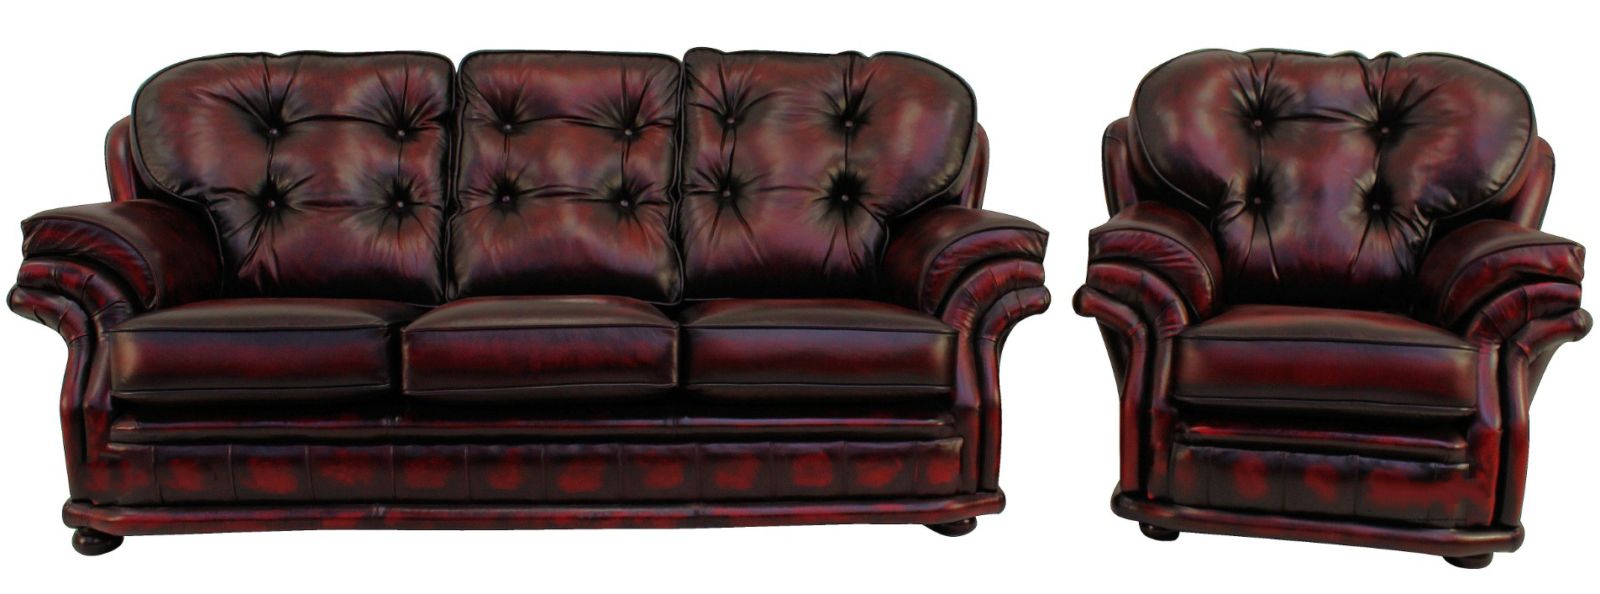 Product photograph of Chesterfield 3 1 Seater Antique Oxblood Red Leather Sofa Suite In Knightsbr Idge Style from Chesterfield Sofas.